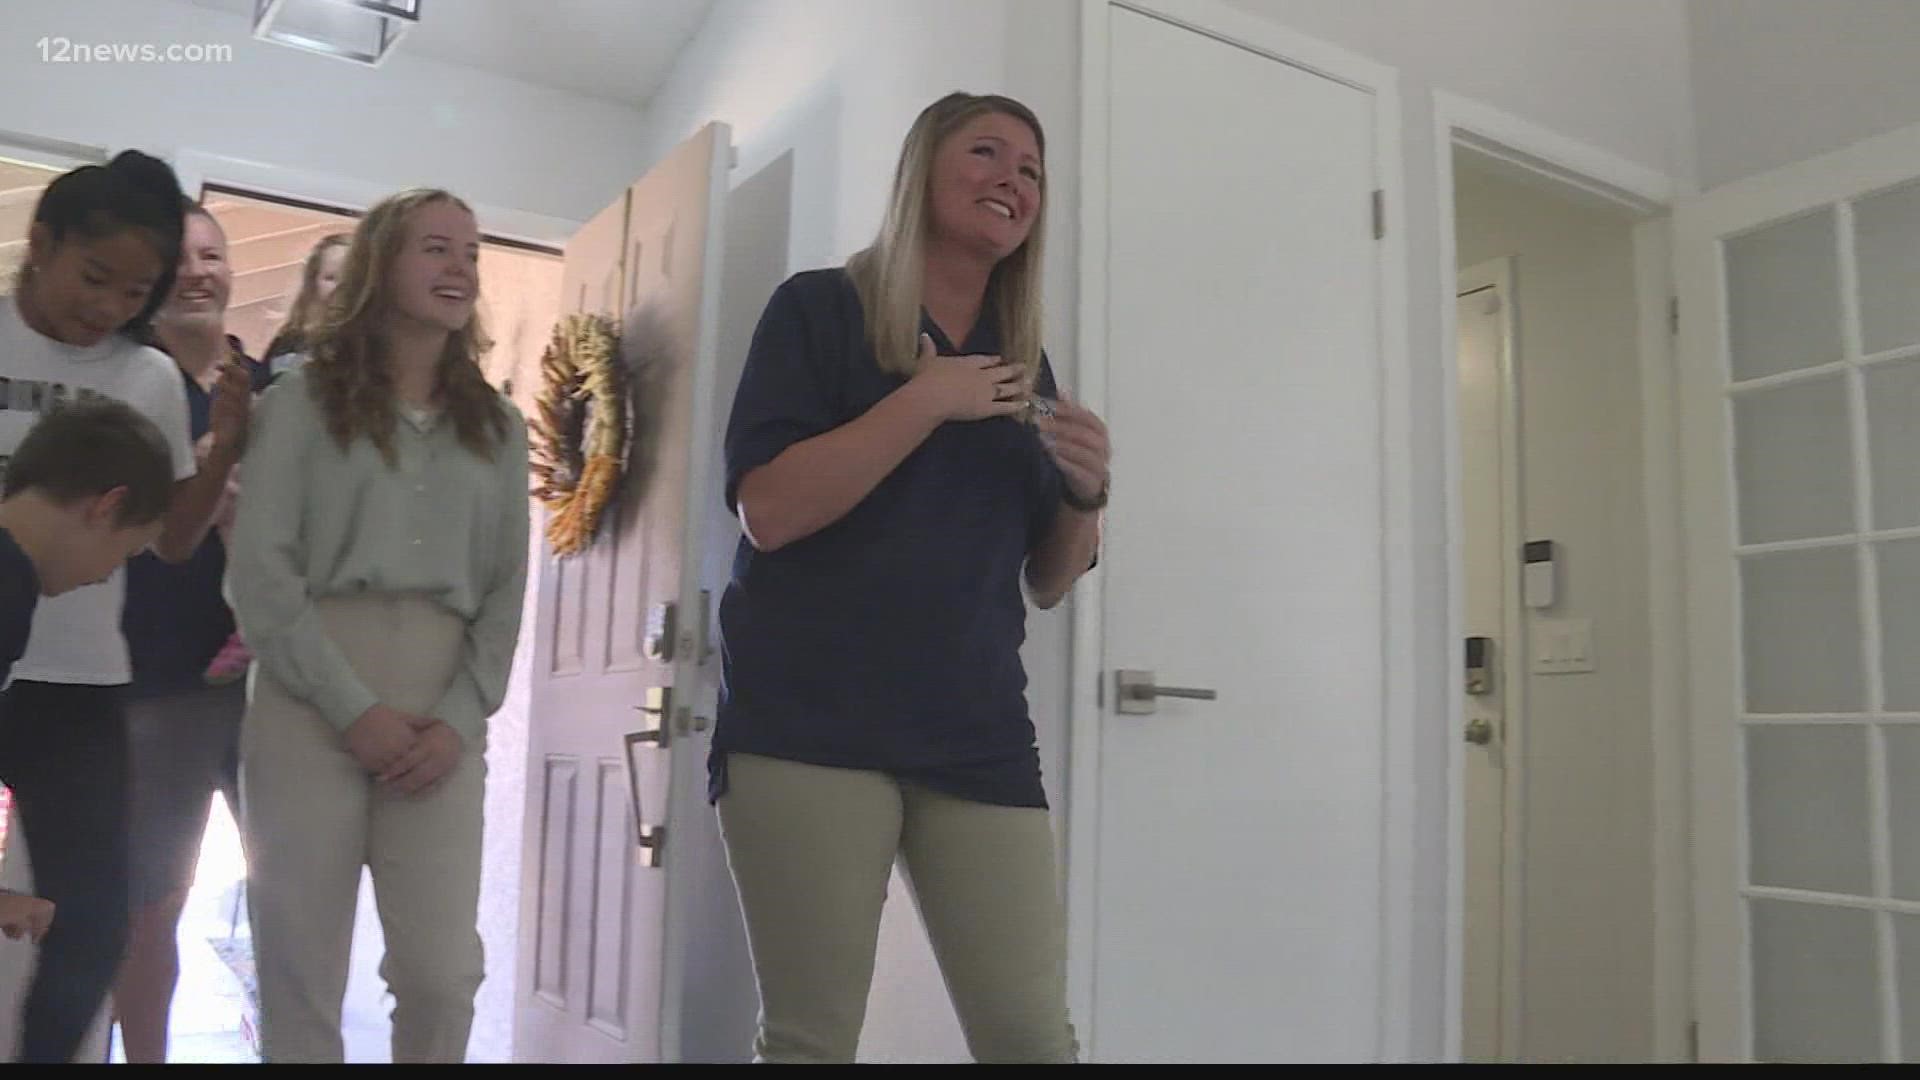 JP Morgan Chase donated a home to the non-profit "Building Homes for Heroes," which in turn gave the home to retired Army Second Lieutenant Amanda mortgage-free.